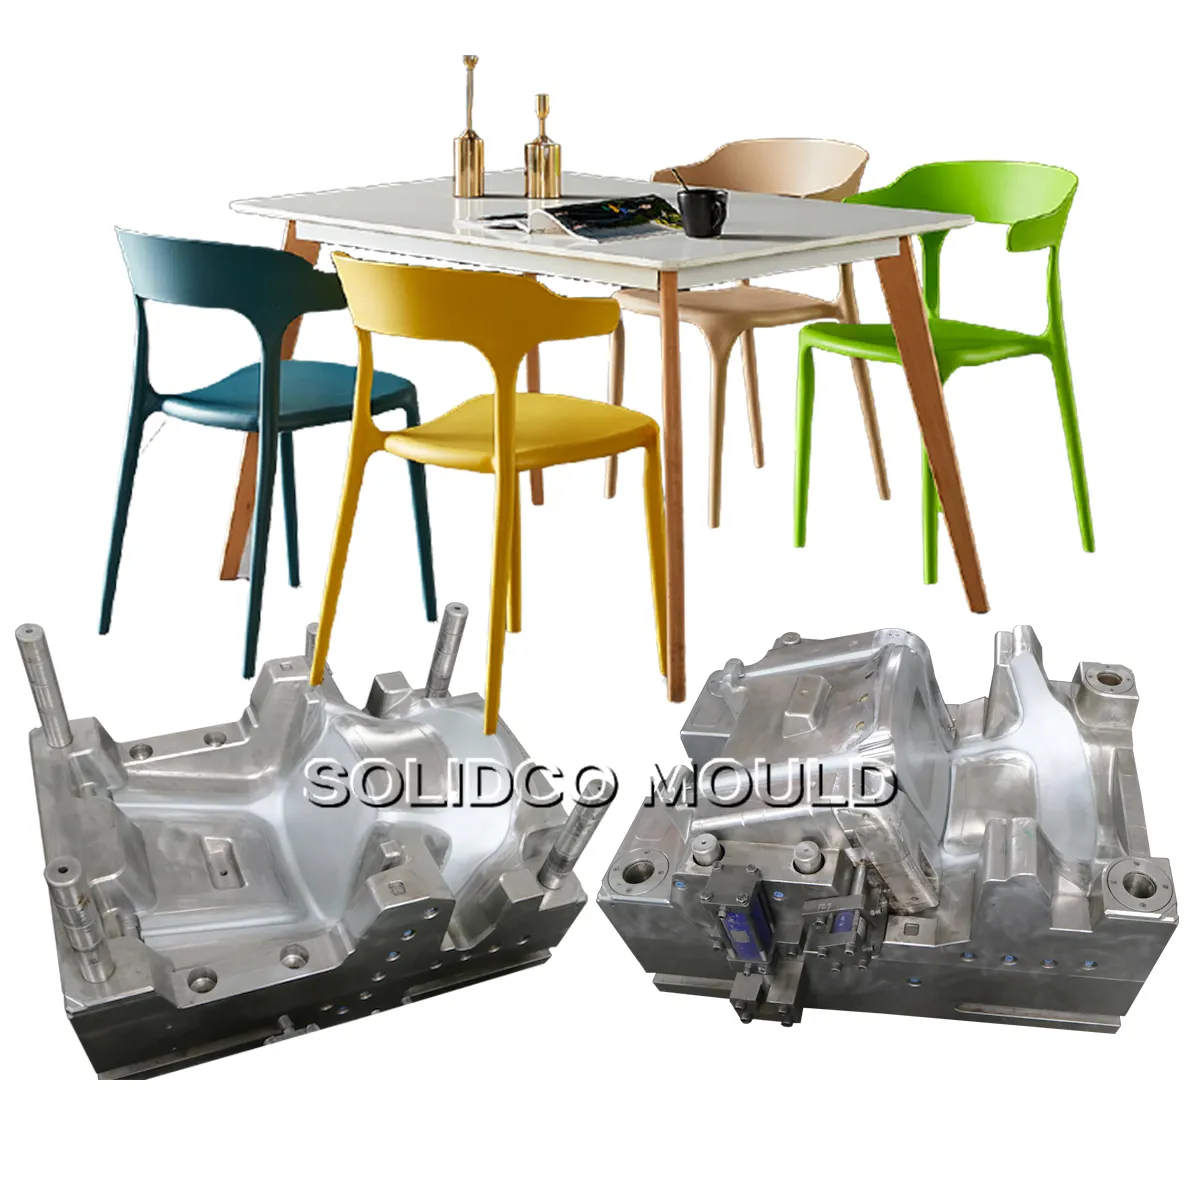 Used Second Hand Plastic Chair Mould For Sale